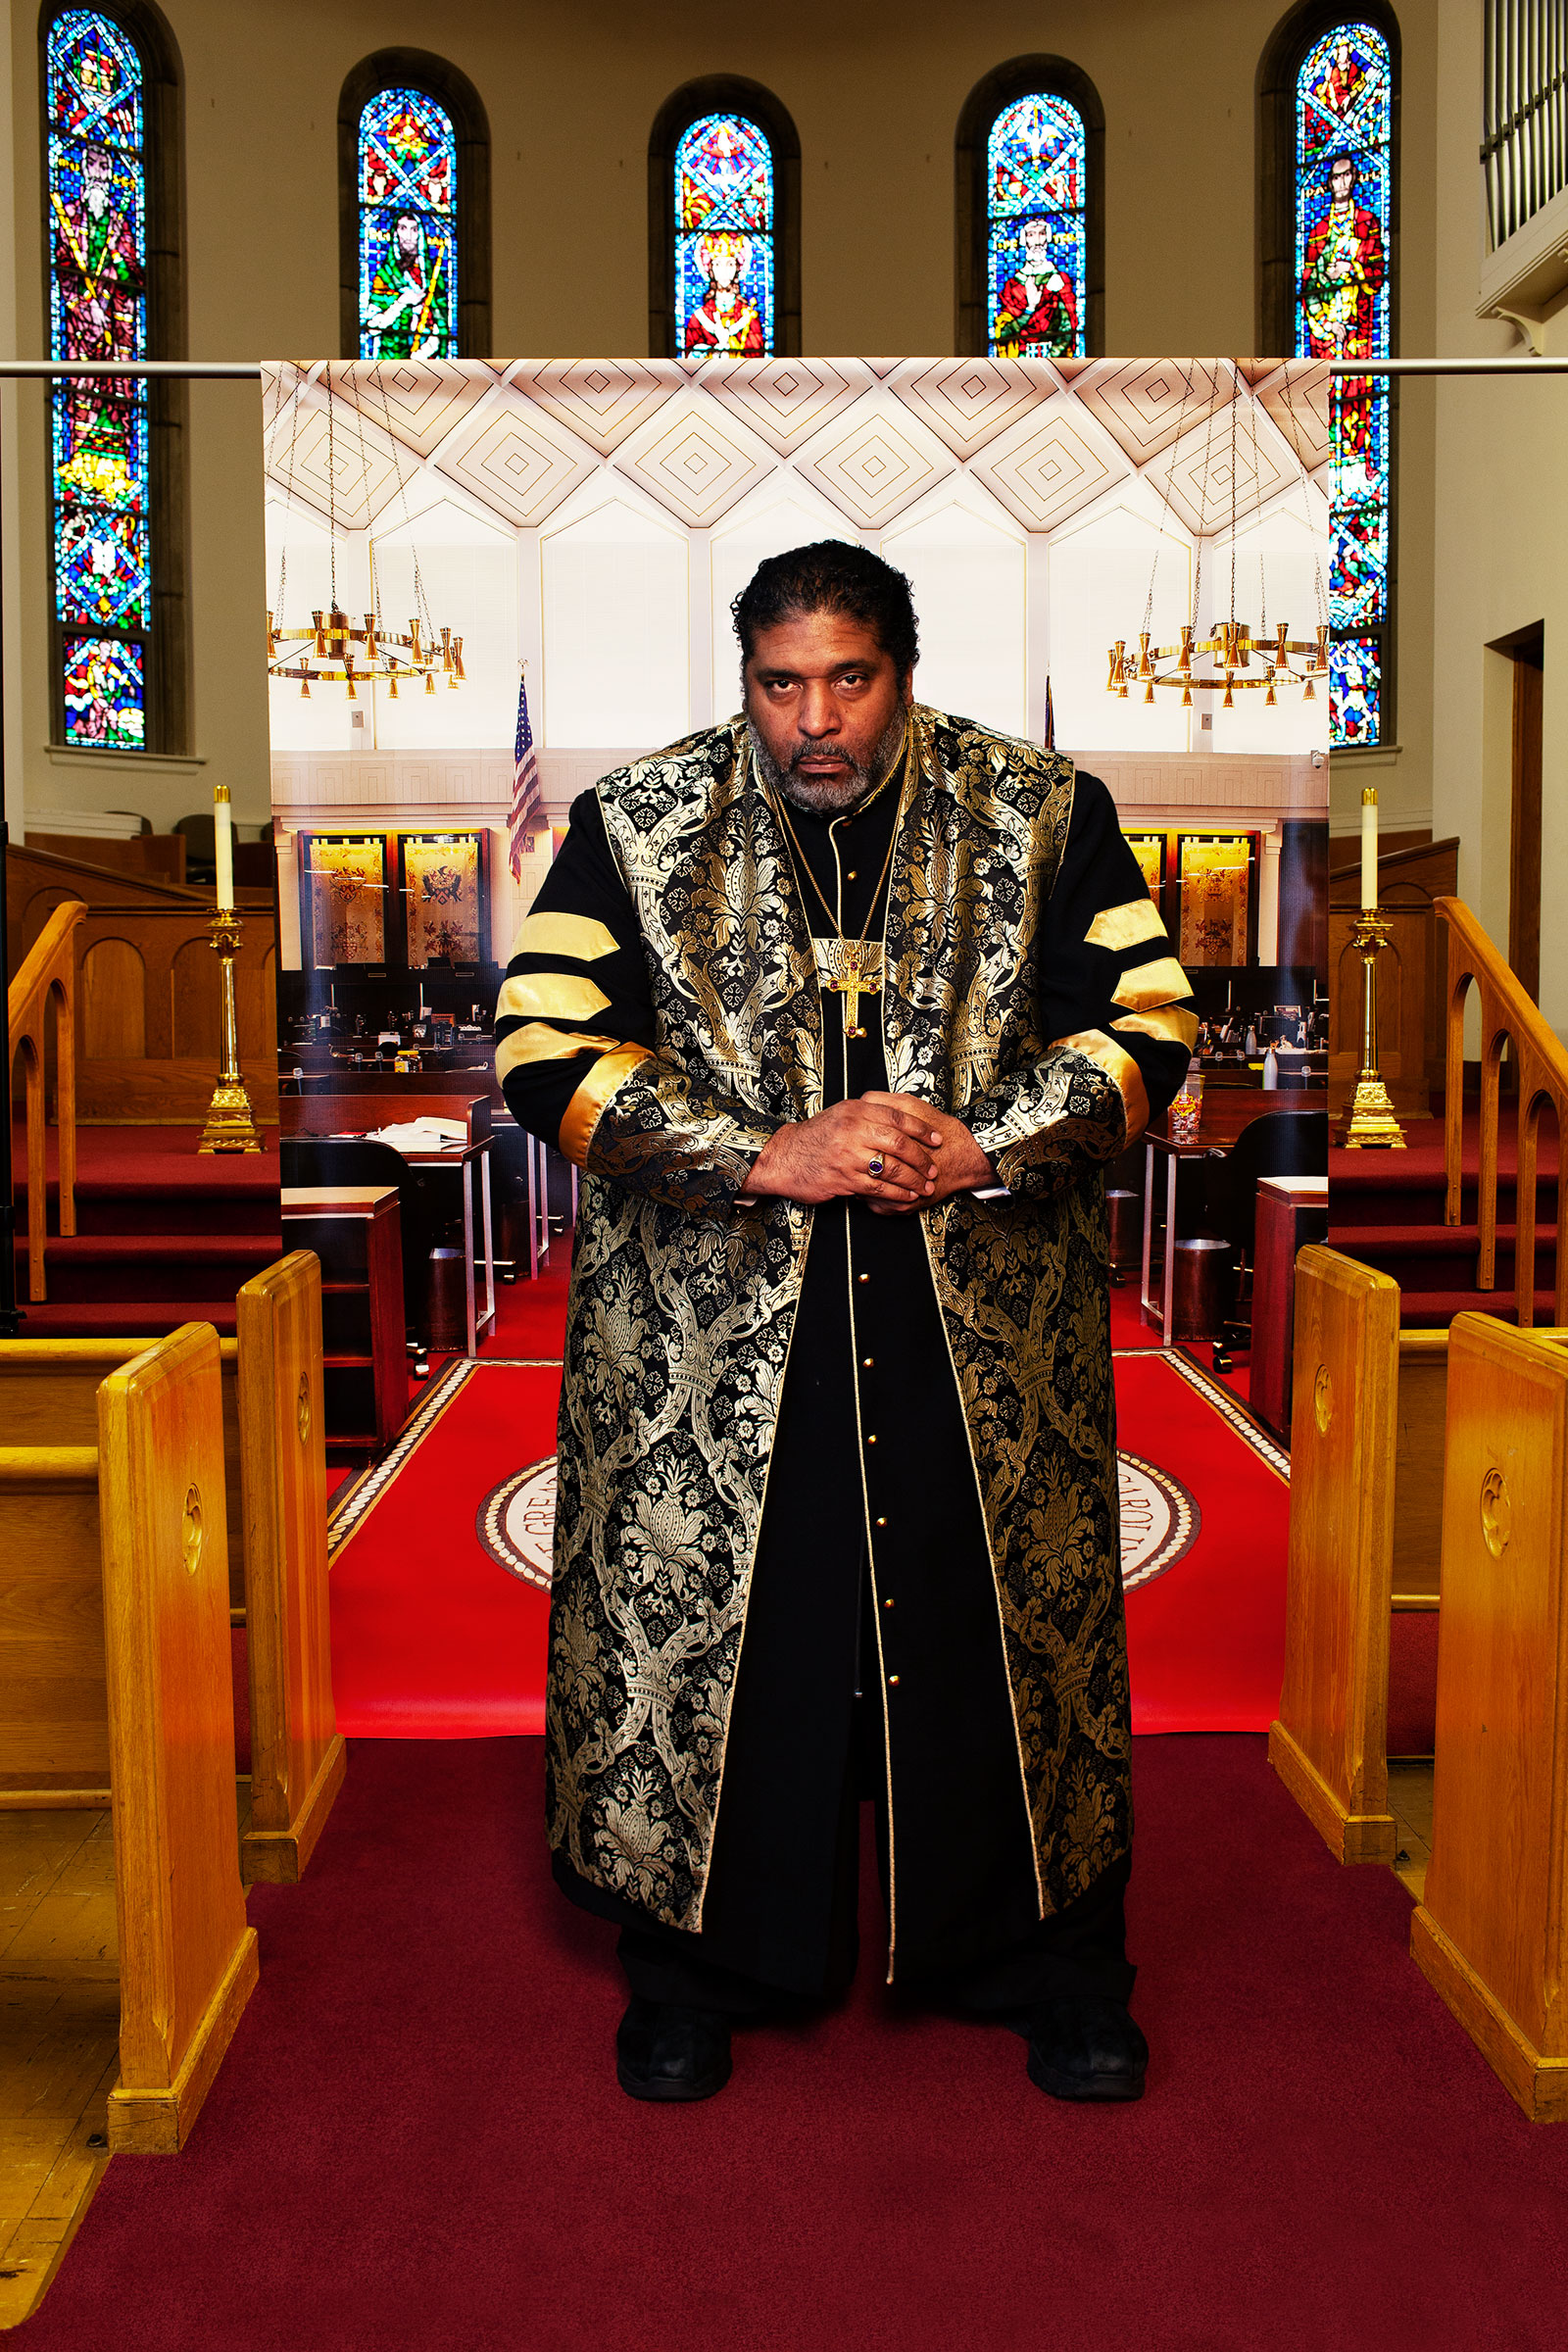 <strong>The Rev. William J. Barber II</strong> at Pullen Memorial Baptist Church in Raleigh, N.C., on Jan. 27, before a backdrop showing the North Carolina house of representatives chamber where he was arrested in 2011. "<a href="https://time.com/5784068/william-barber-ii-faith-injustice/">The Equalizers</a>," March 2 issue. (Endia Beal for TIME)